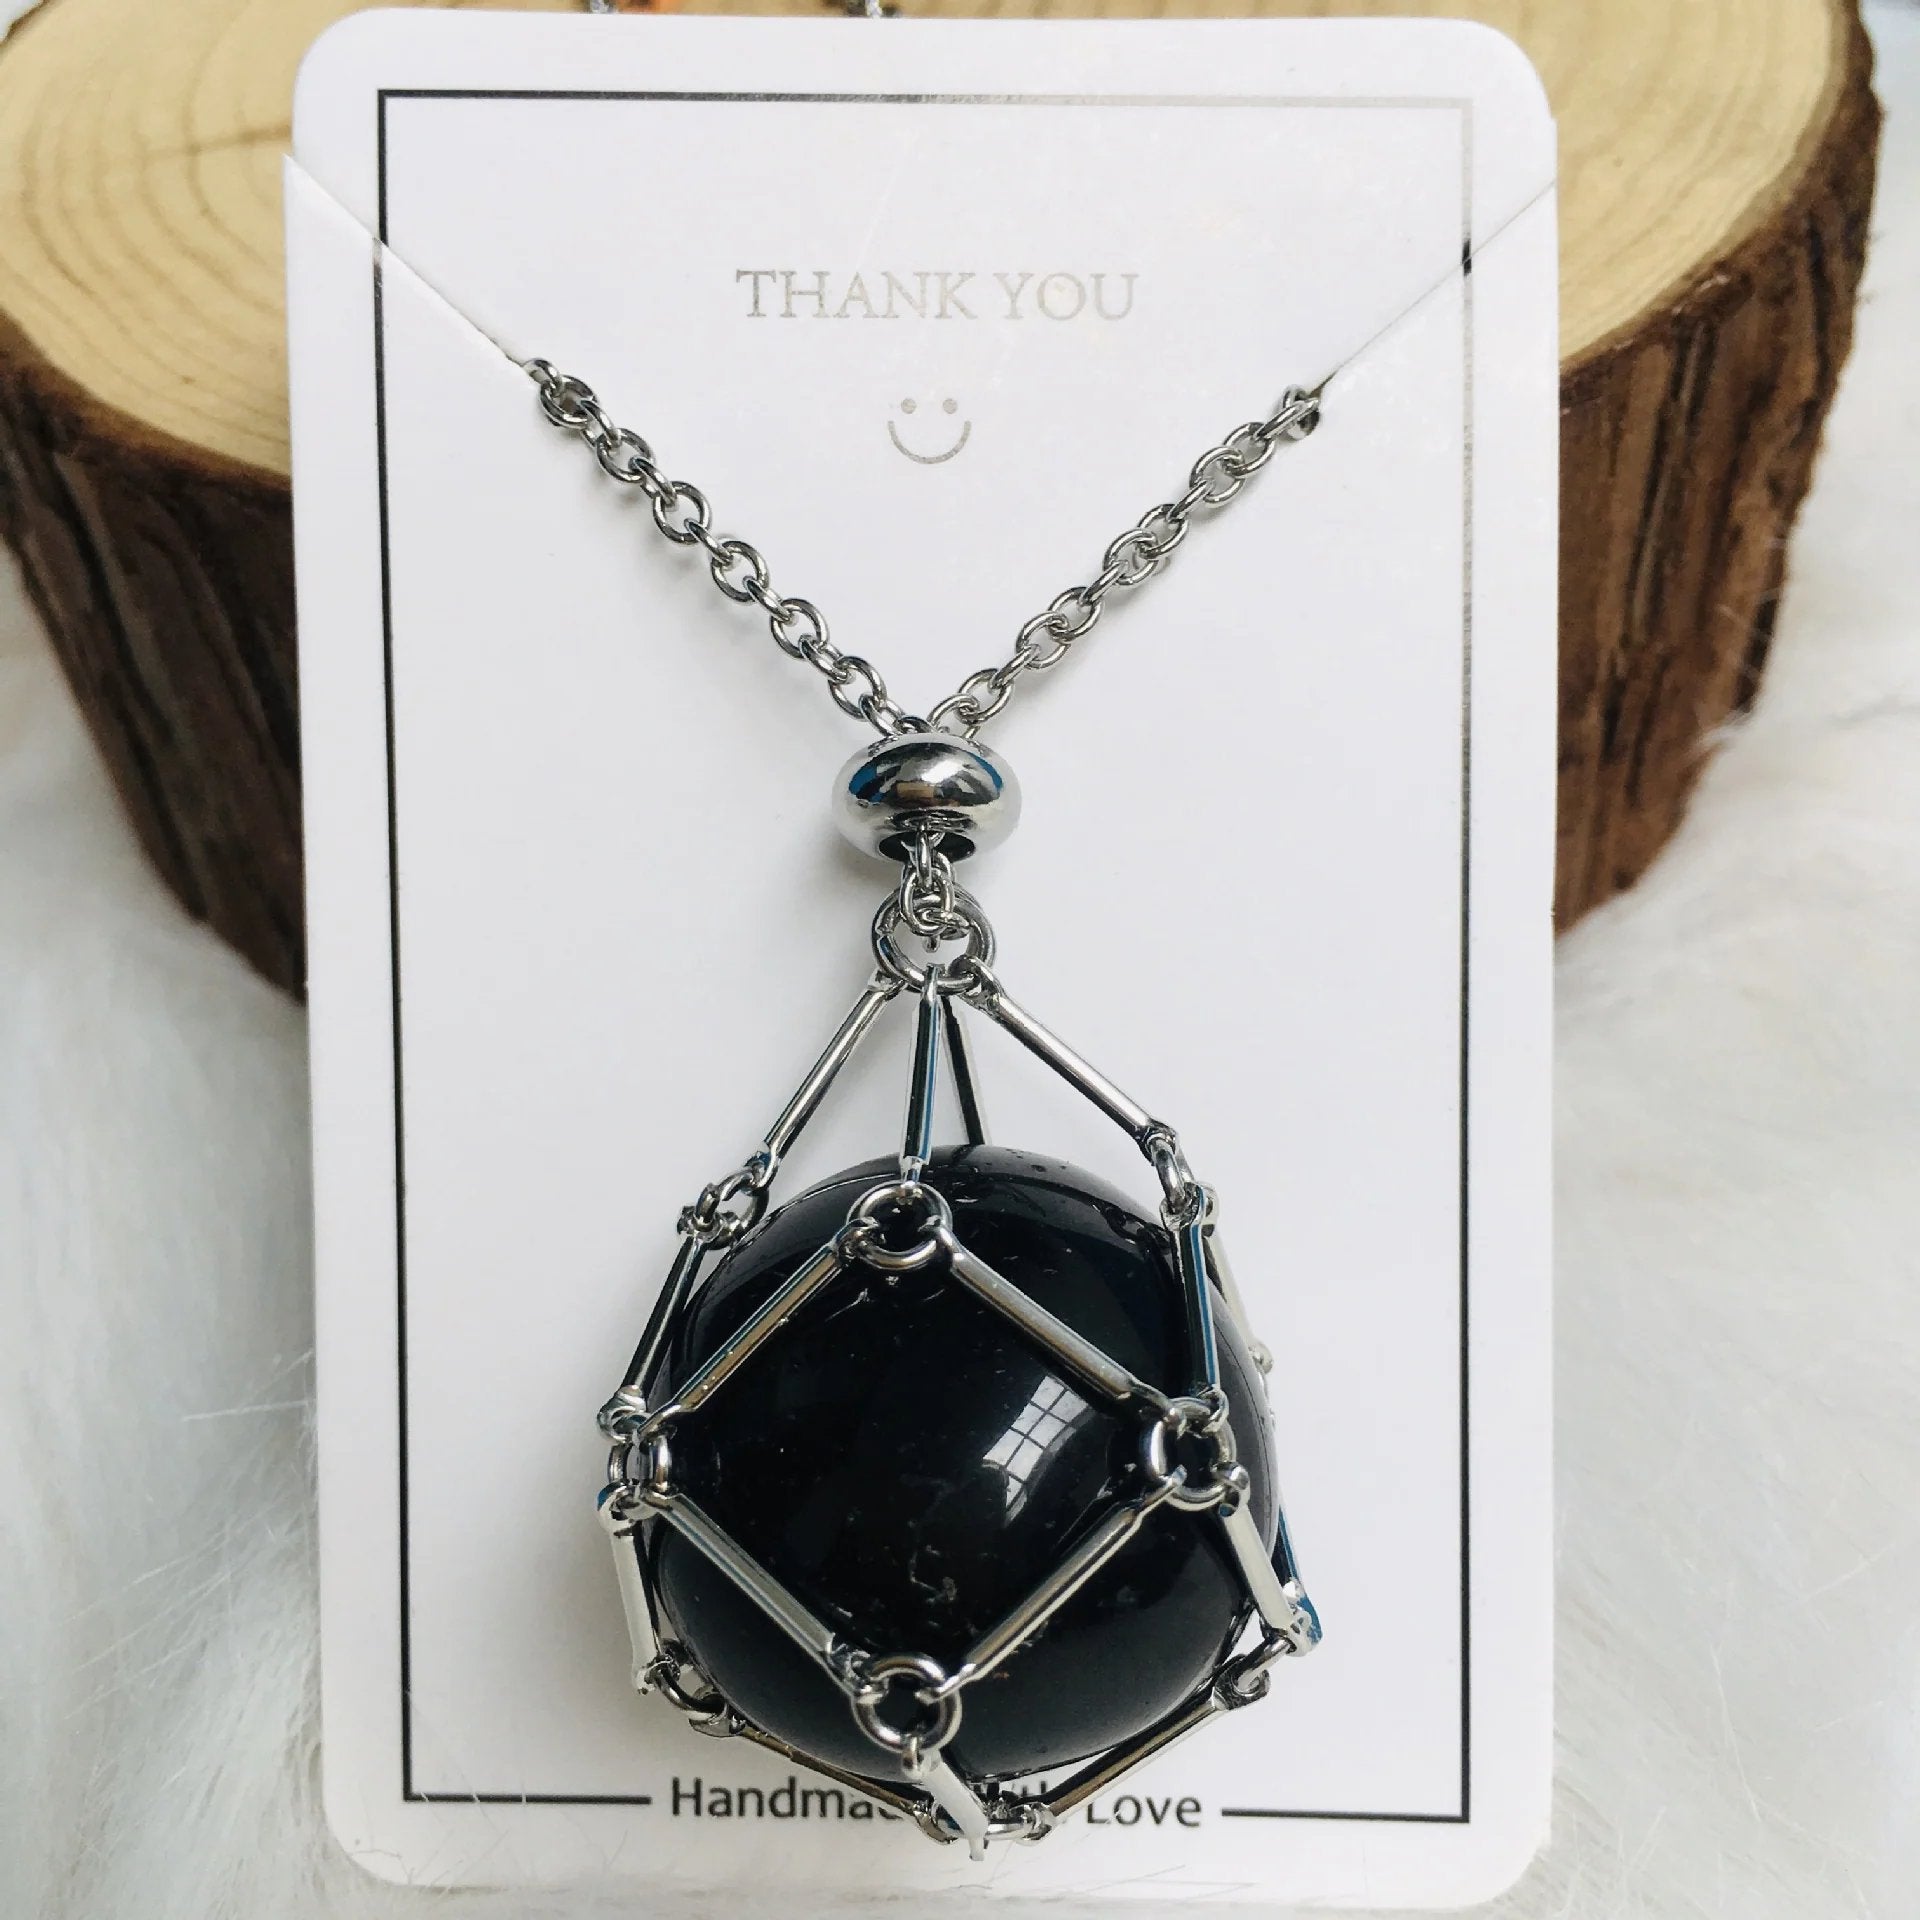 2023 Fashionablet®Crystal Necklace - Free (Crystal) Gift Included🎁